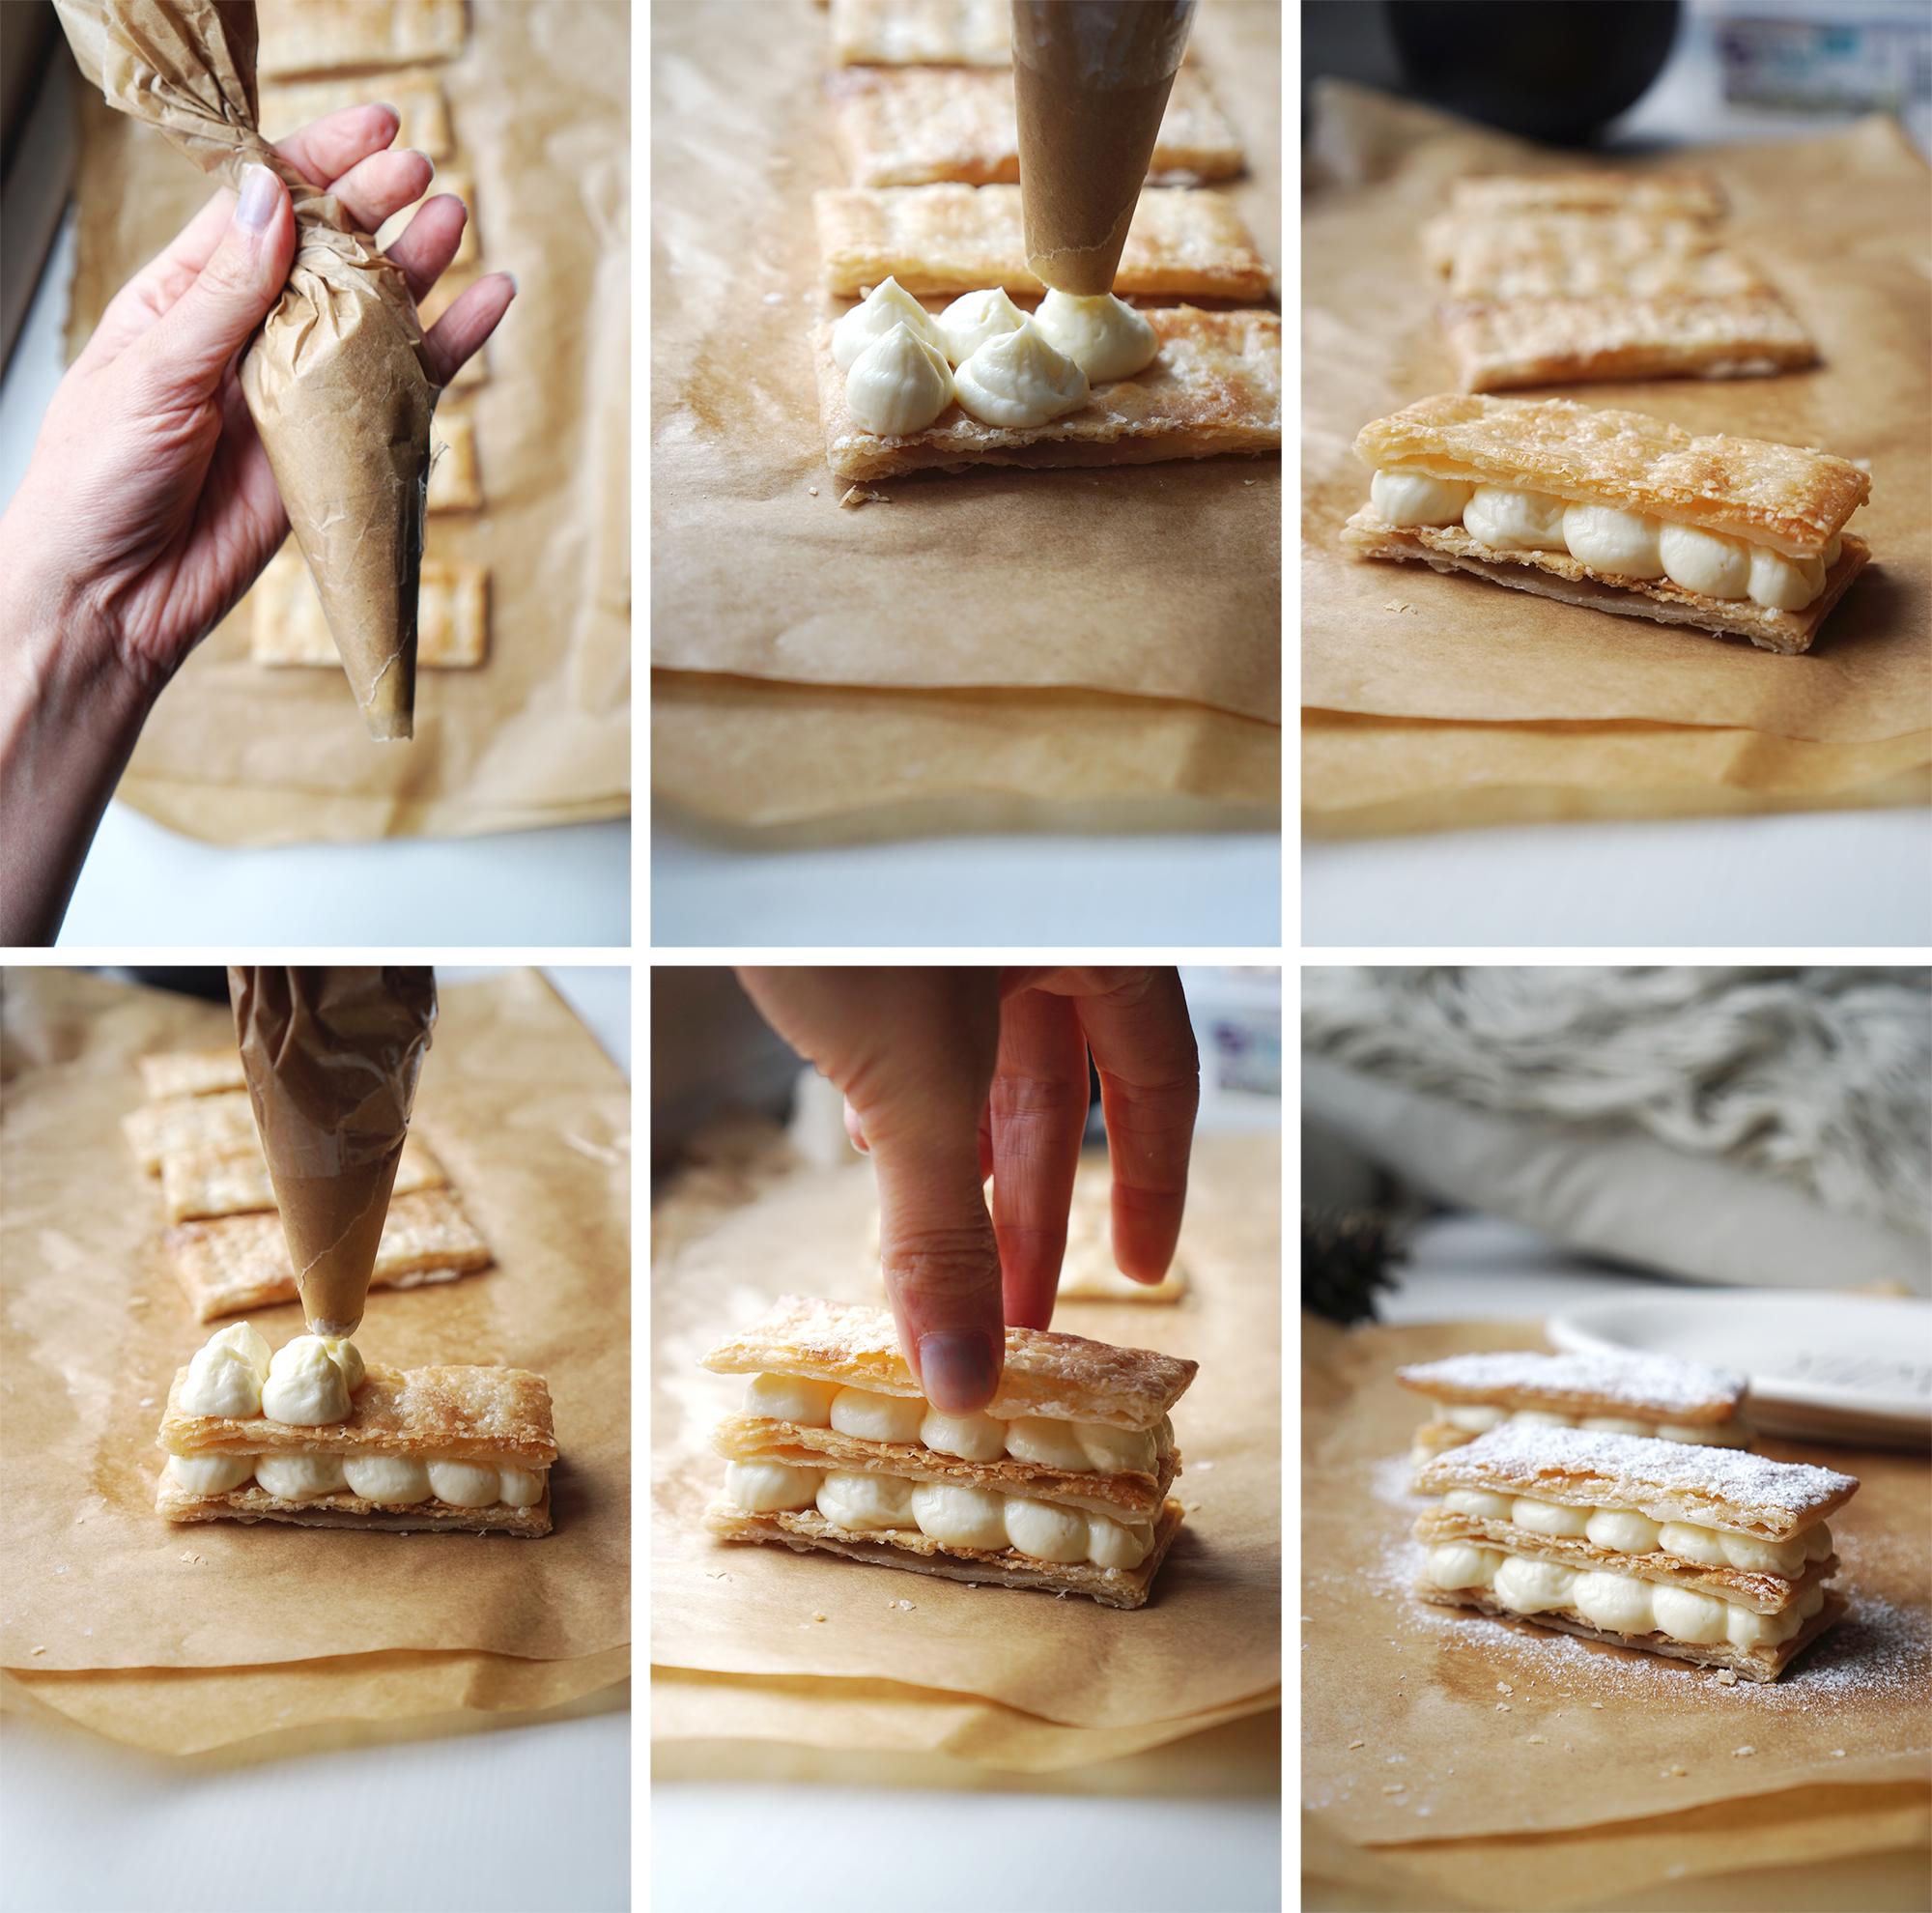 How to make cream cheese mille feuille with Jus Rol gluten free puff pastry / piping the sweetened cream cheese